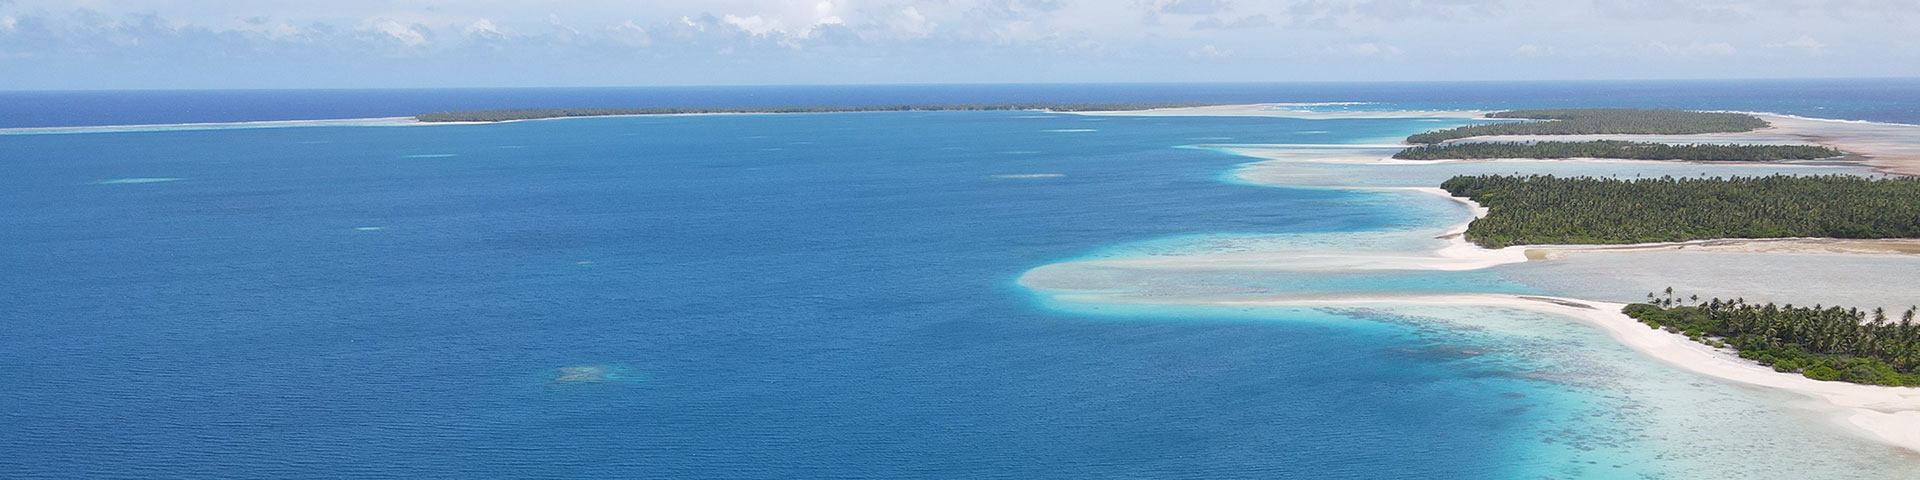 Small, green islands surrounded by turquoise sea.